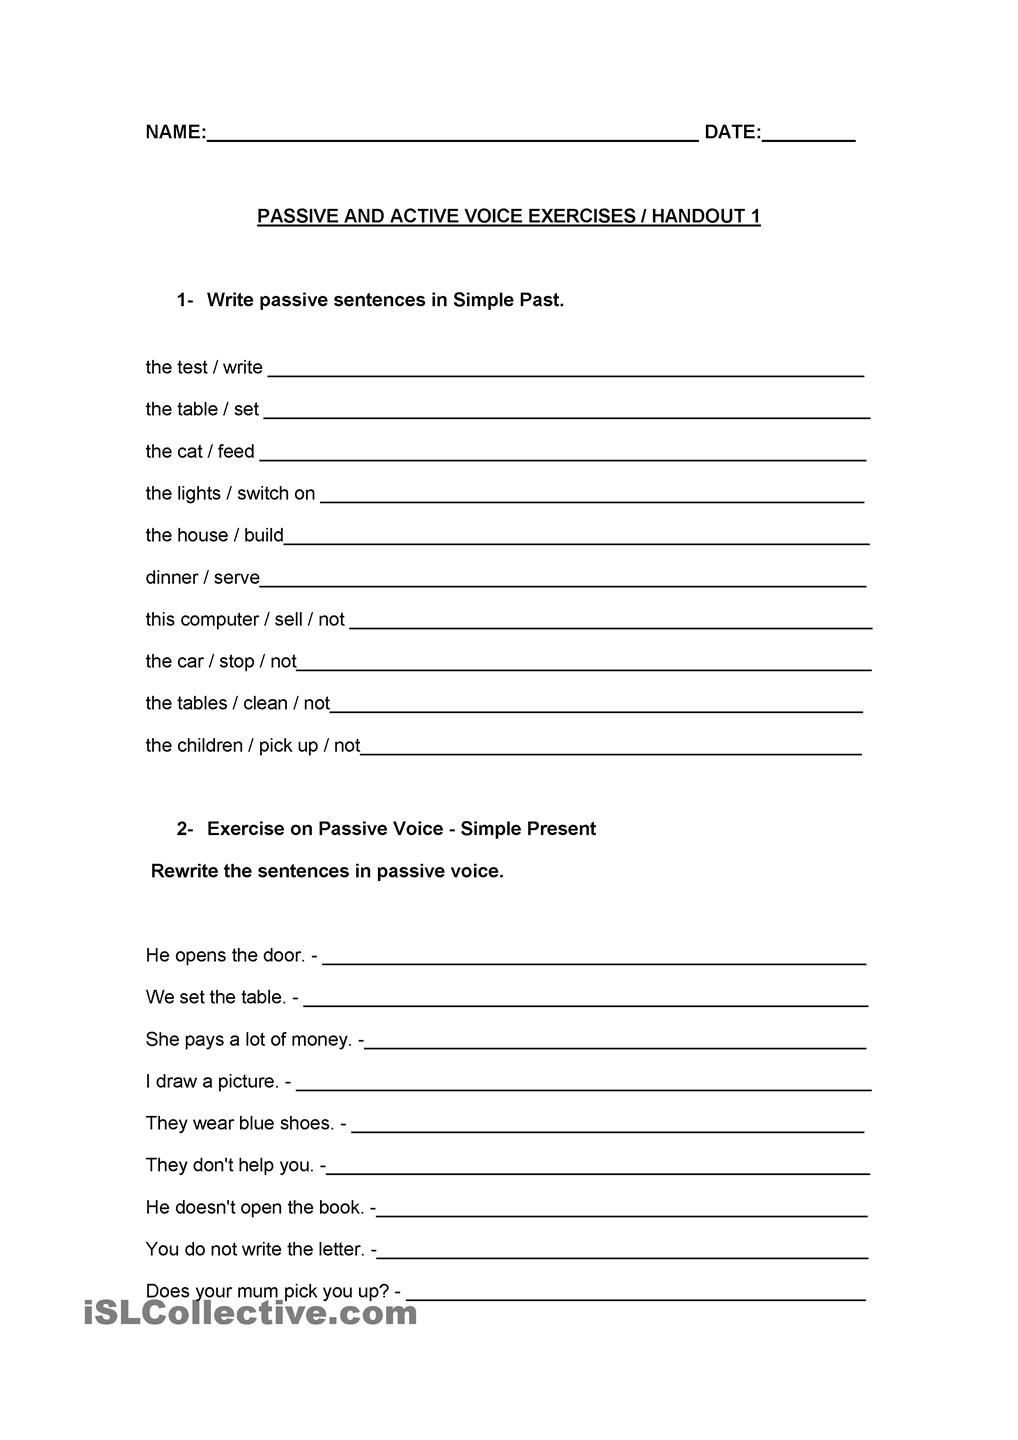 Active Passive Voice Worksheet Passive and Active Voice